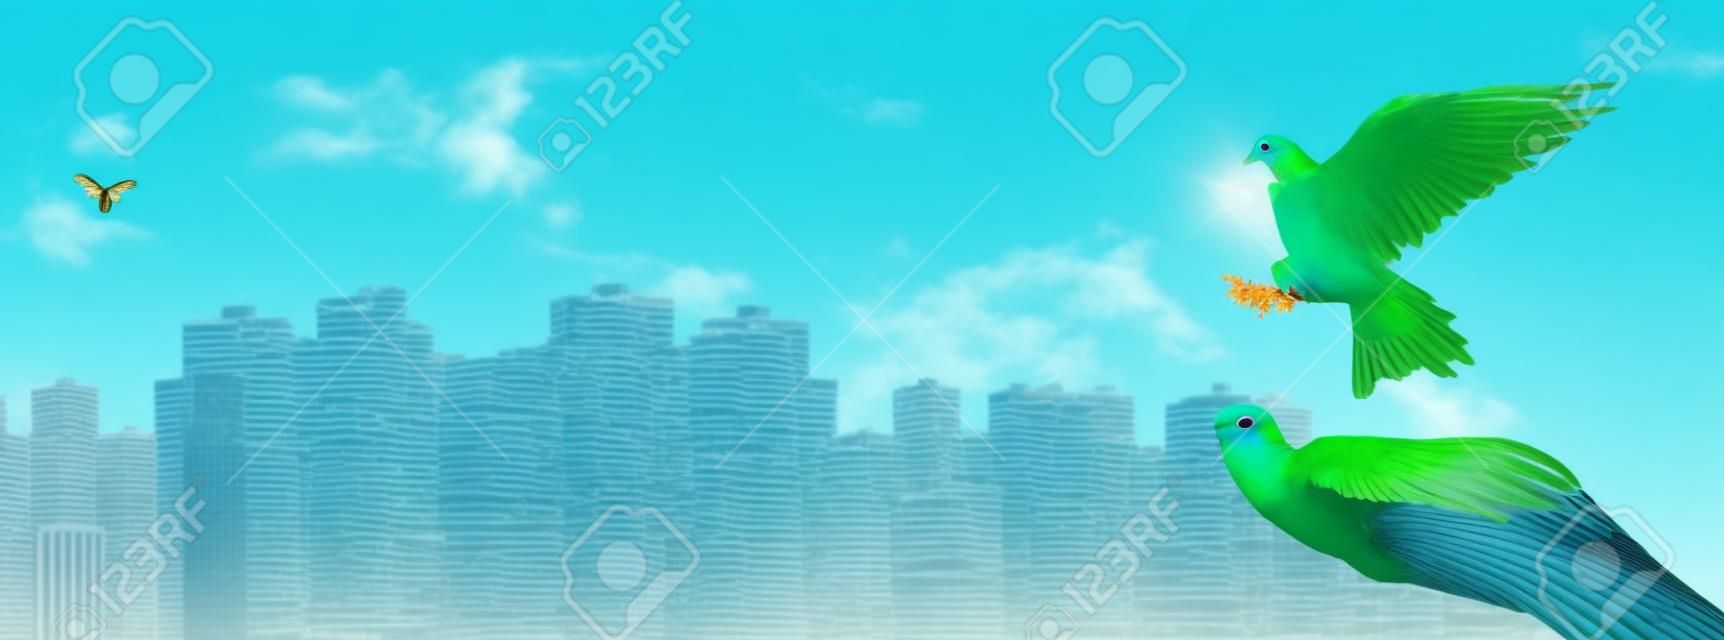 World Cities Day concept: green Dove carrying leaf branch on City and blue nature background